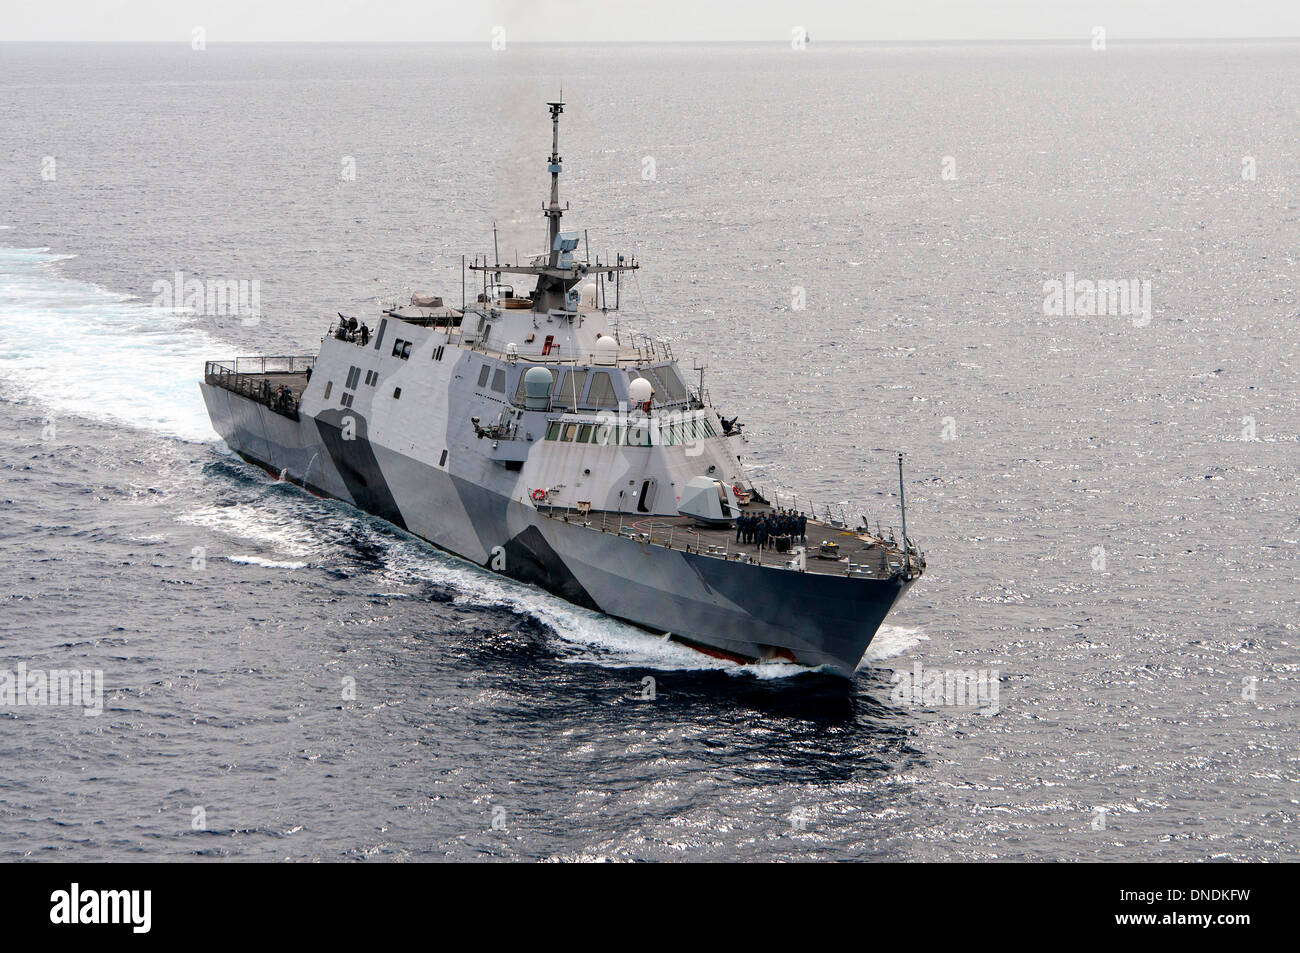 The US Navy's first high tech littoral combat ship, USS Freedom prepares to enter the channel of Joint Base Pearl Harbor-Hickam after the maiden proof-of-concept deployment December 13, 2013 in Honolulu, HI. Stock Photo